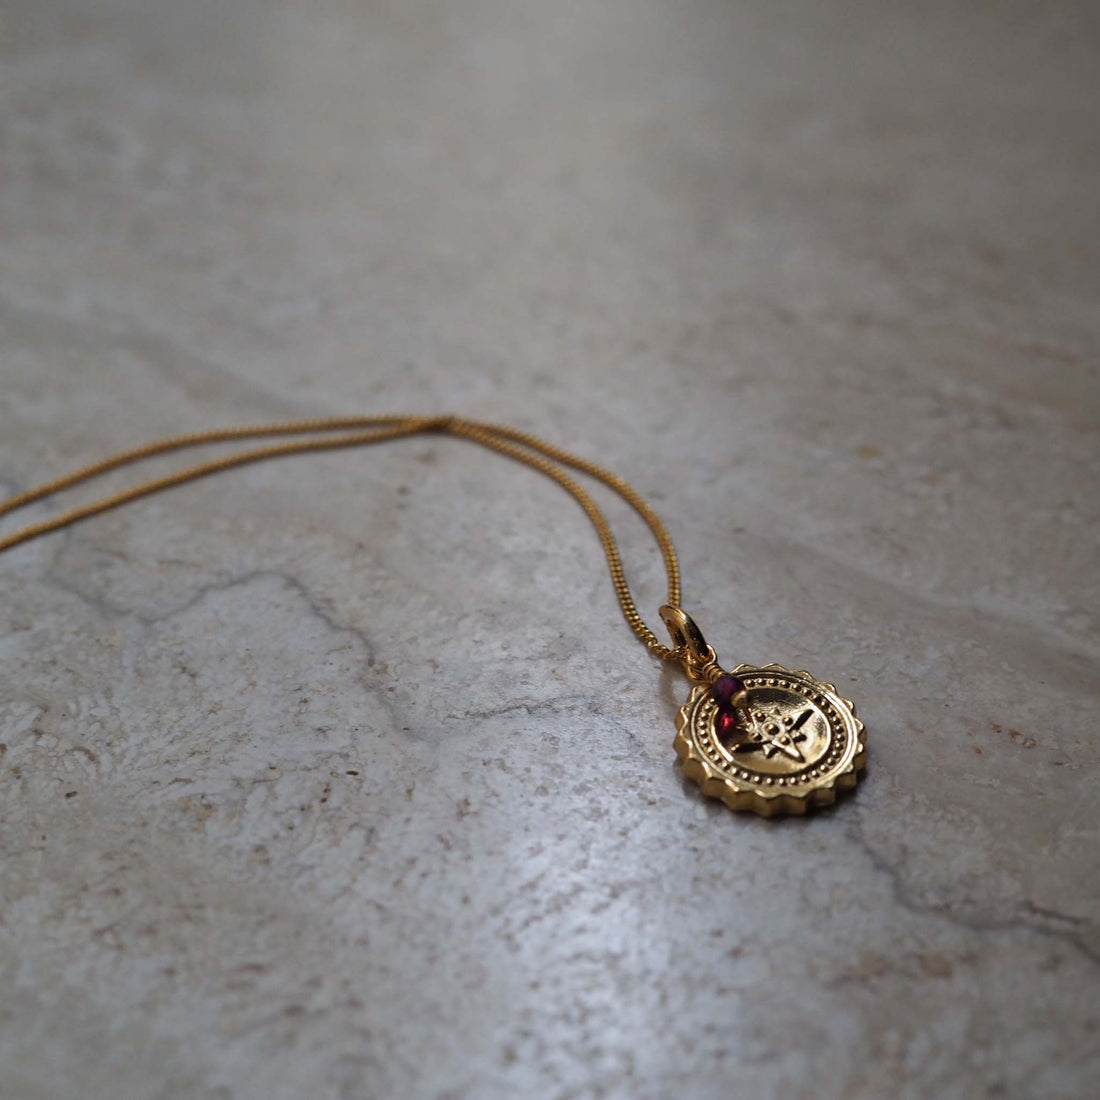 Bianca Jones Compass Midi Necklace with Garnet: A symbol of guidance and adventure, perfect for encouraging loved ones on their journeys.